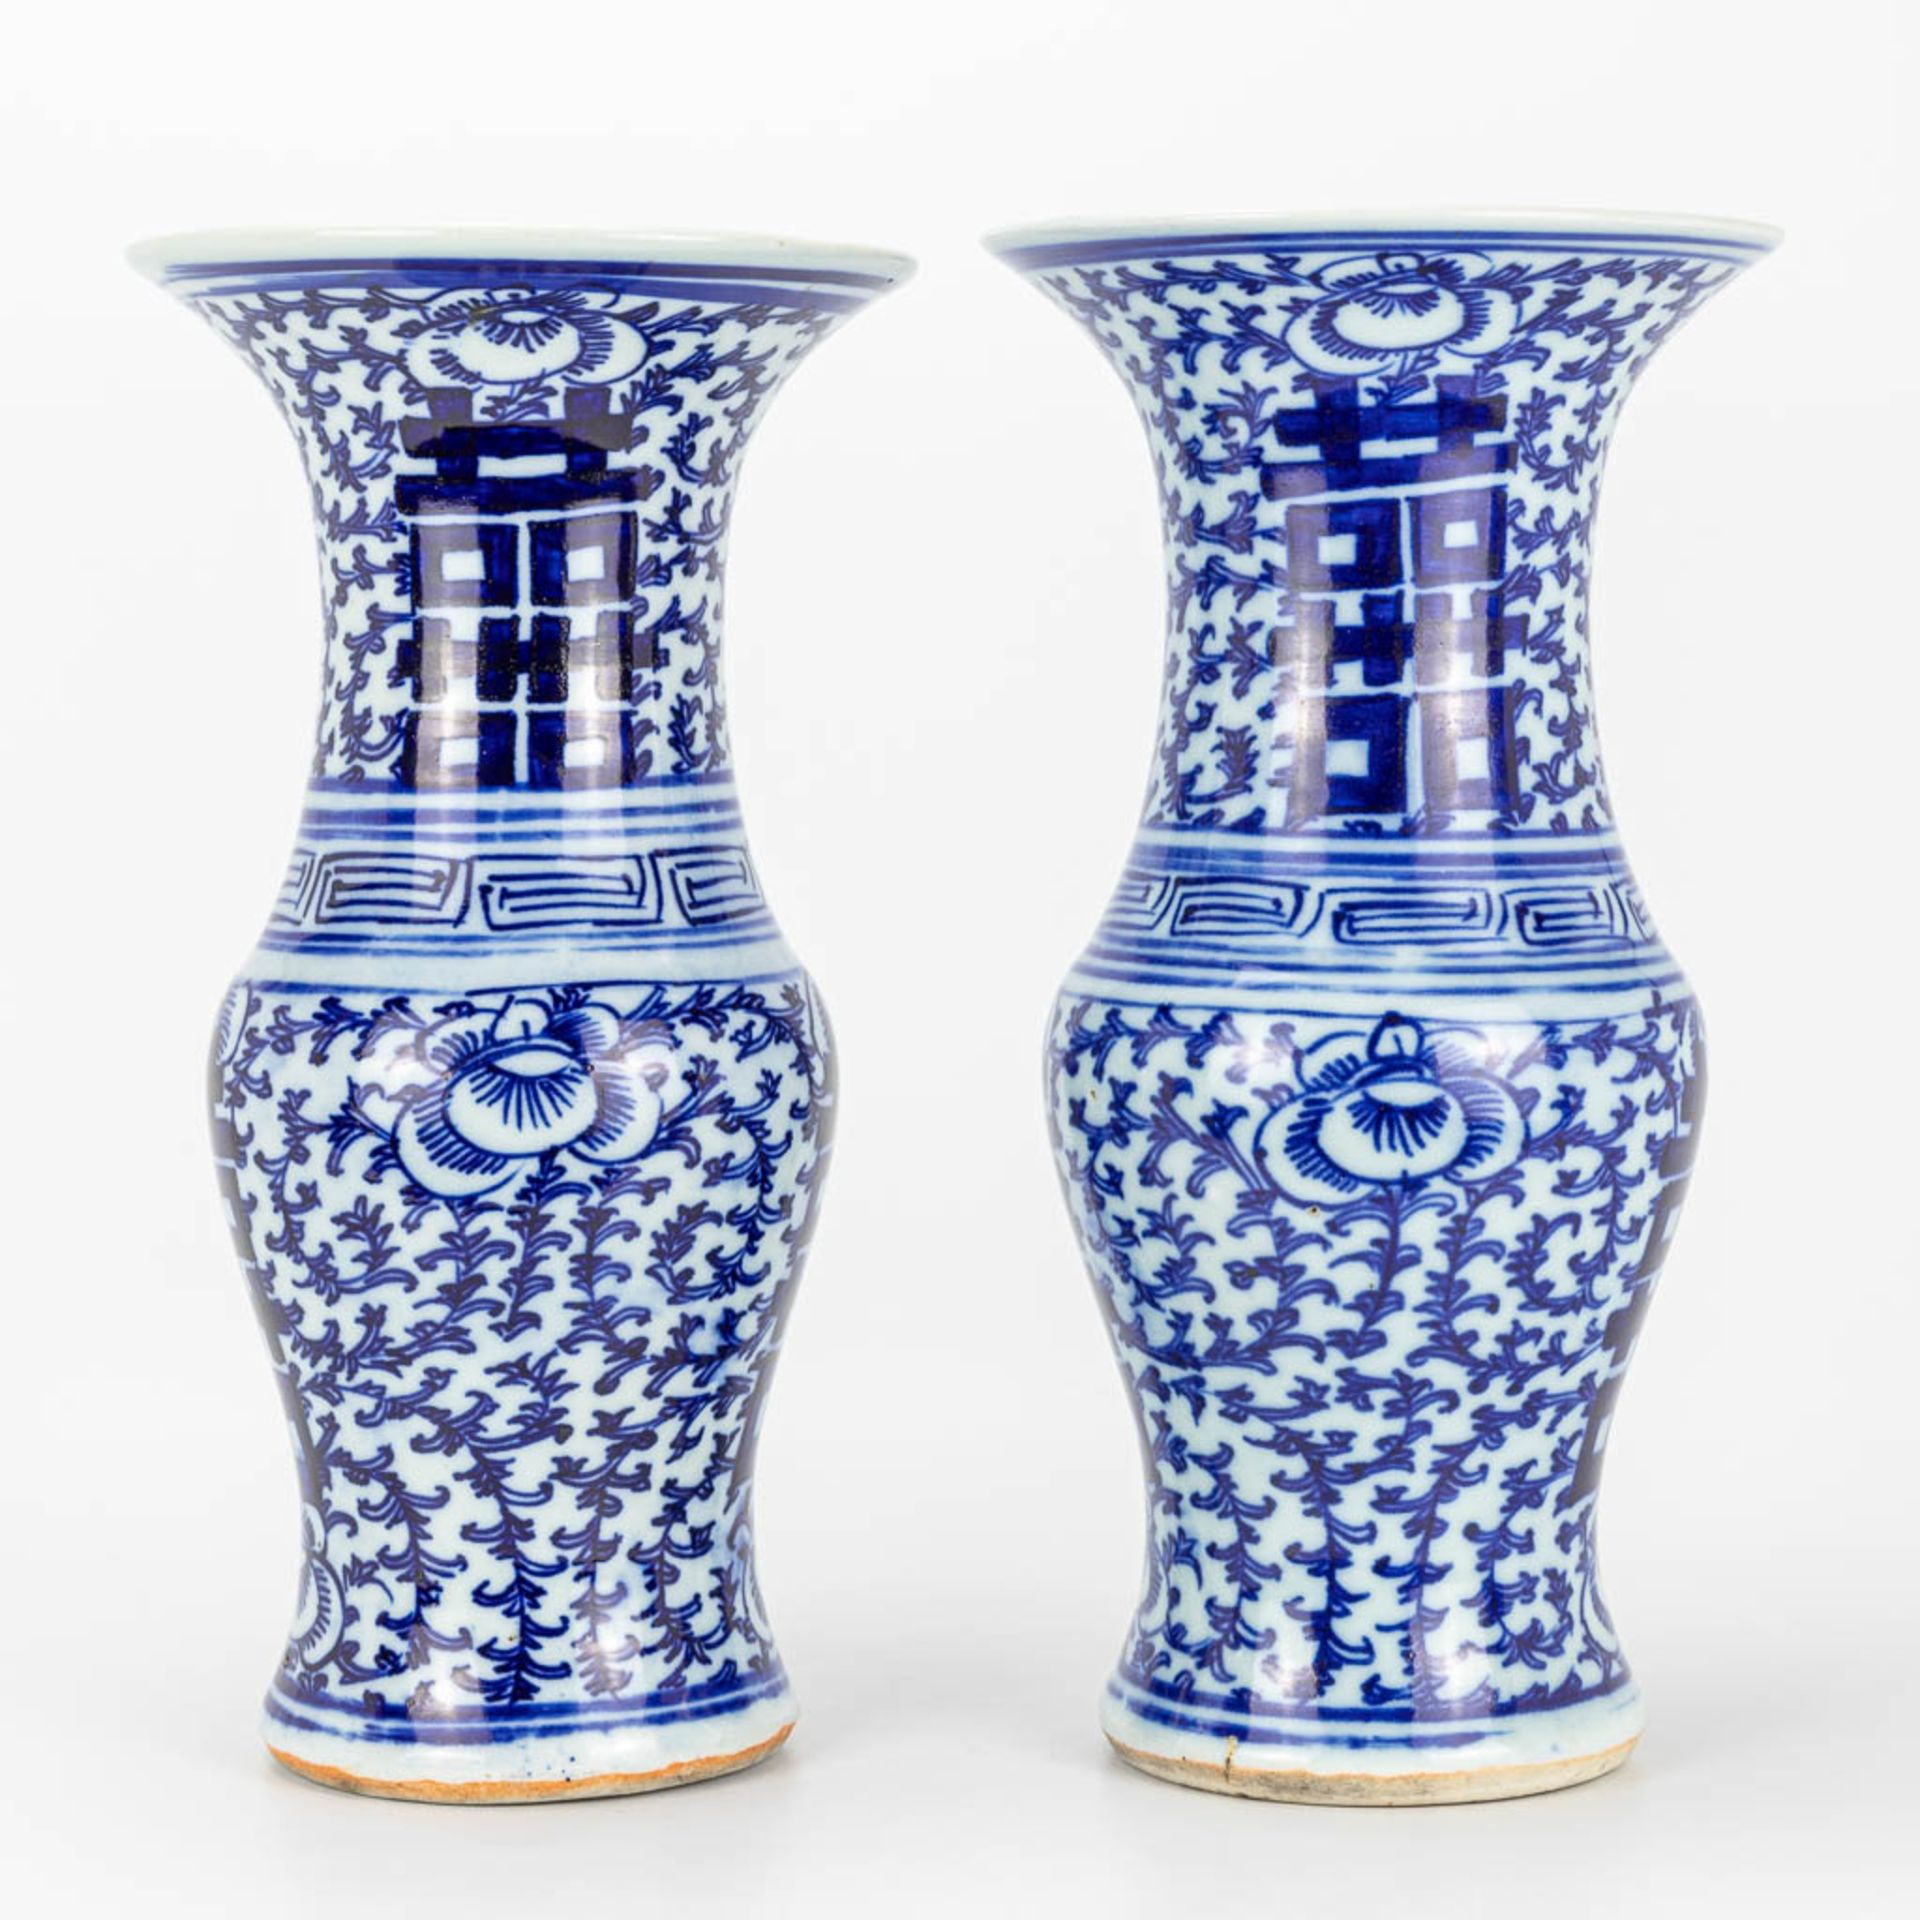 A pair of vases made of Chinese blue-white porcelain with 'Double Xi-sign' symbols of happiness. - Image 9 of 13